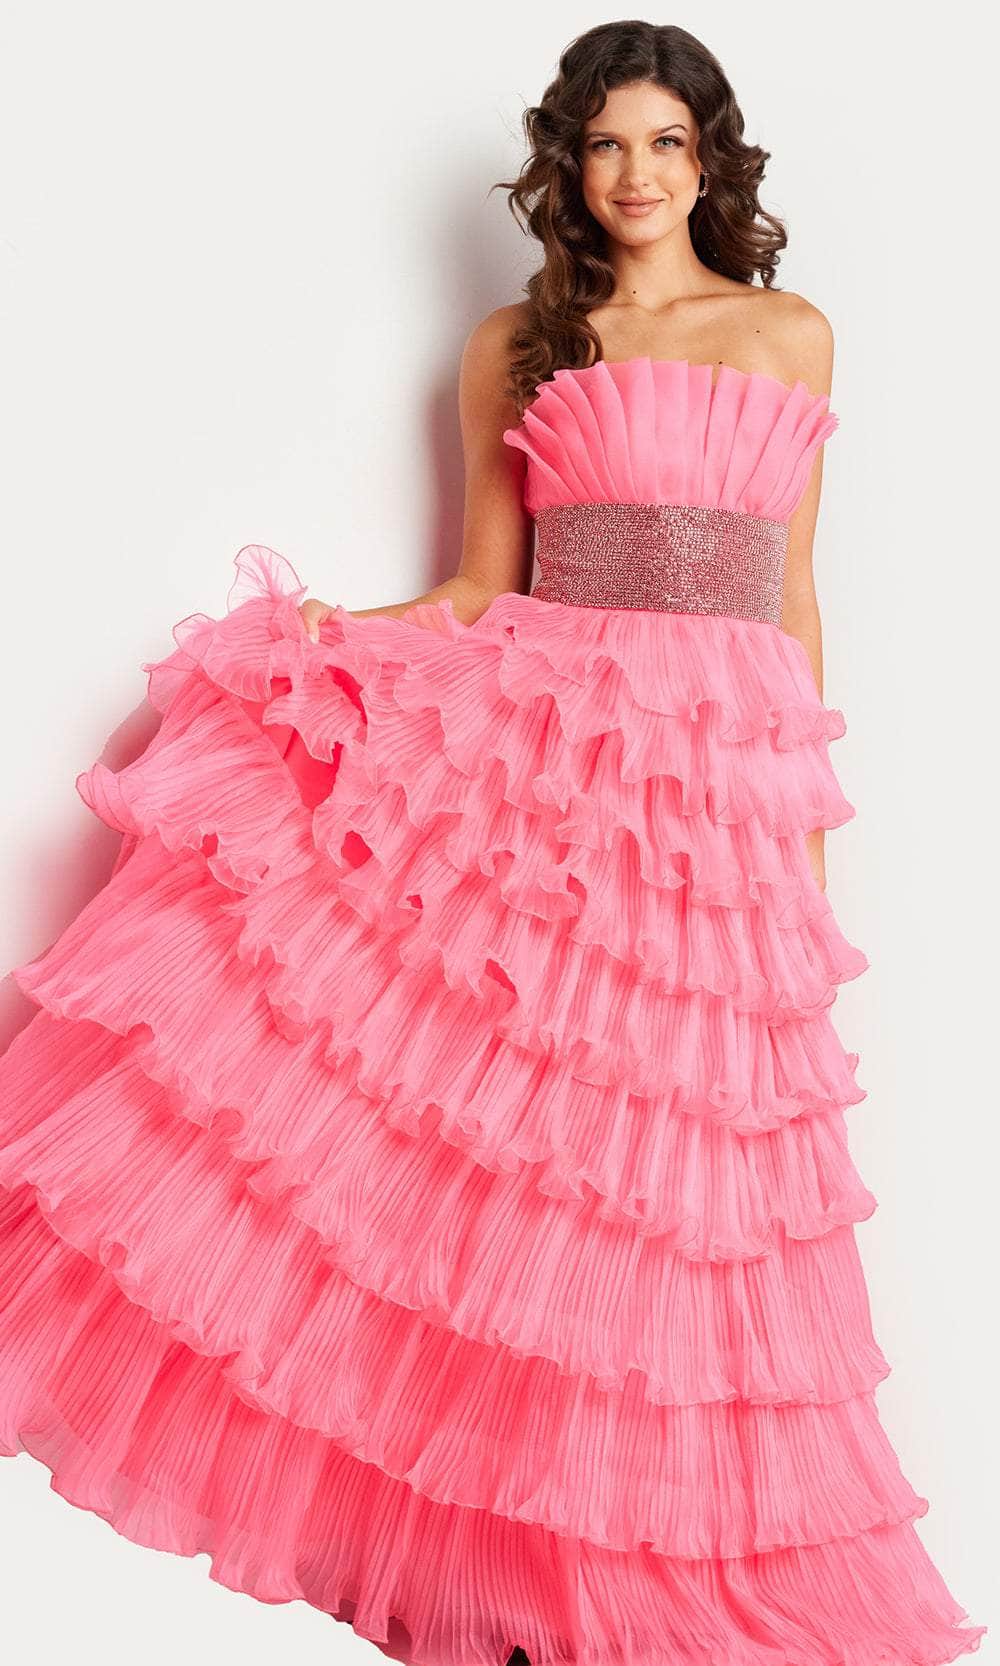 Jovani 26314 - Strapless Ruffled Prom Dress Special Occasion Dress 00 / Hot Pink